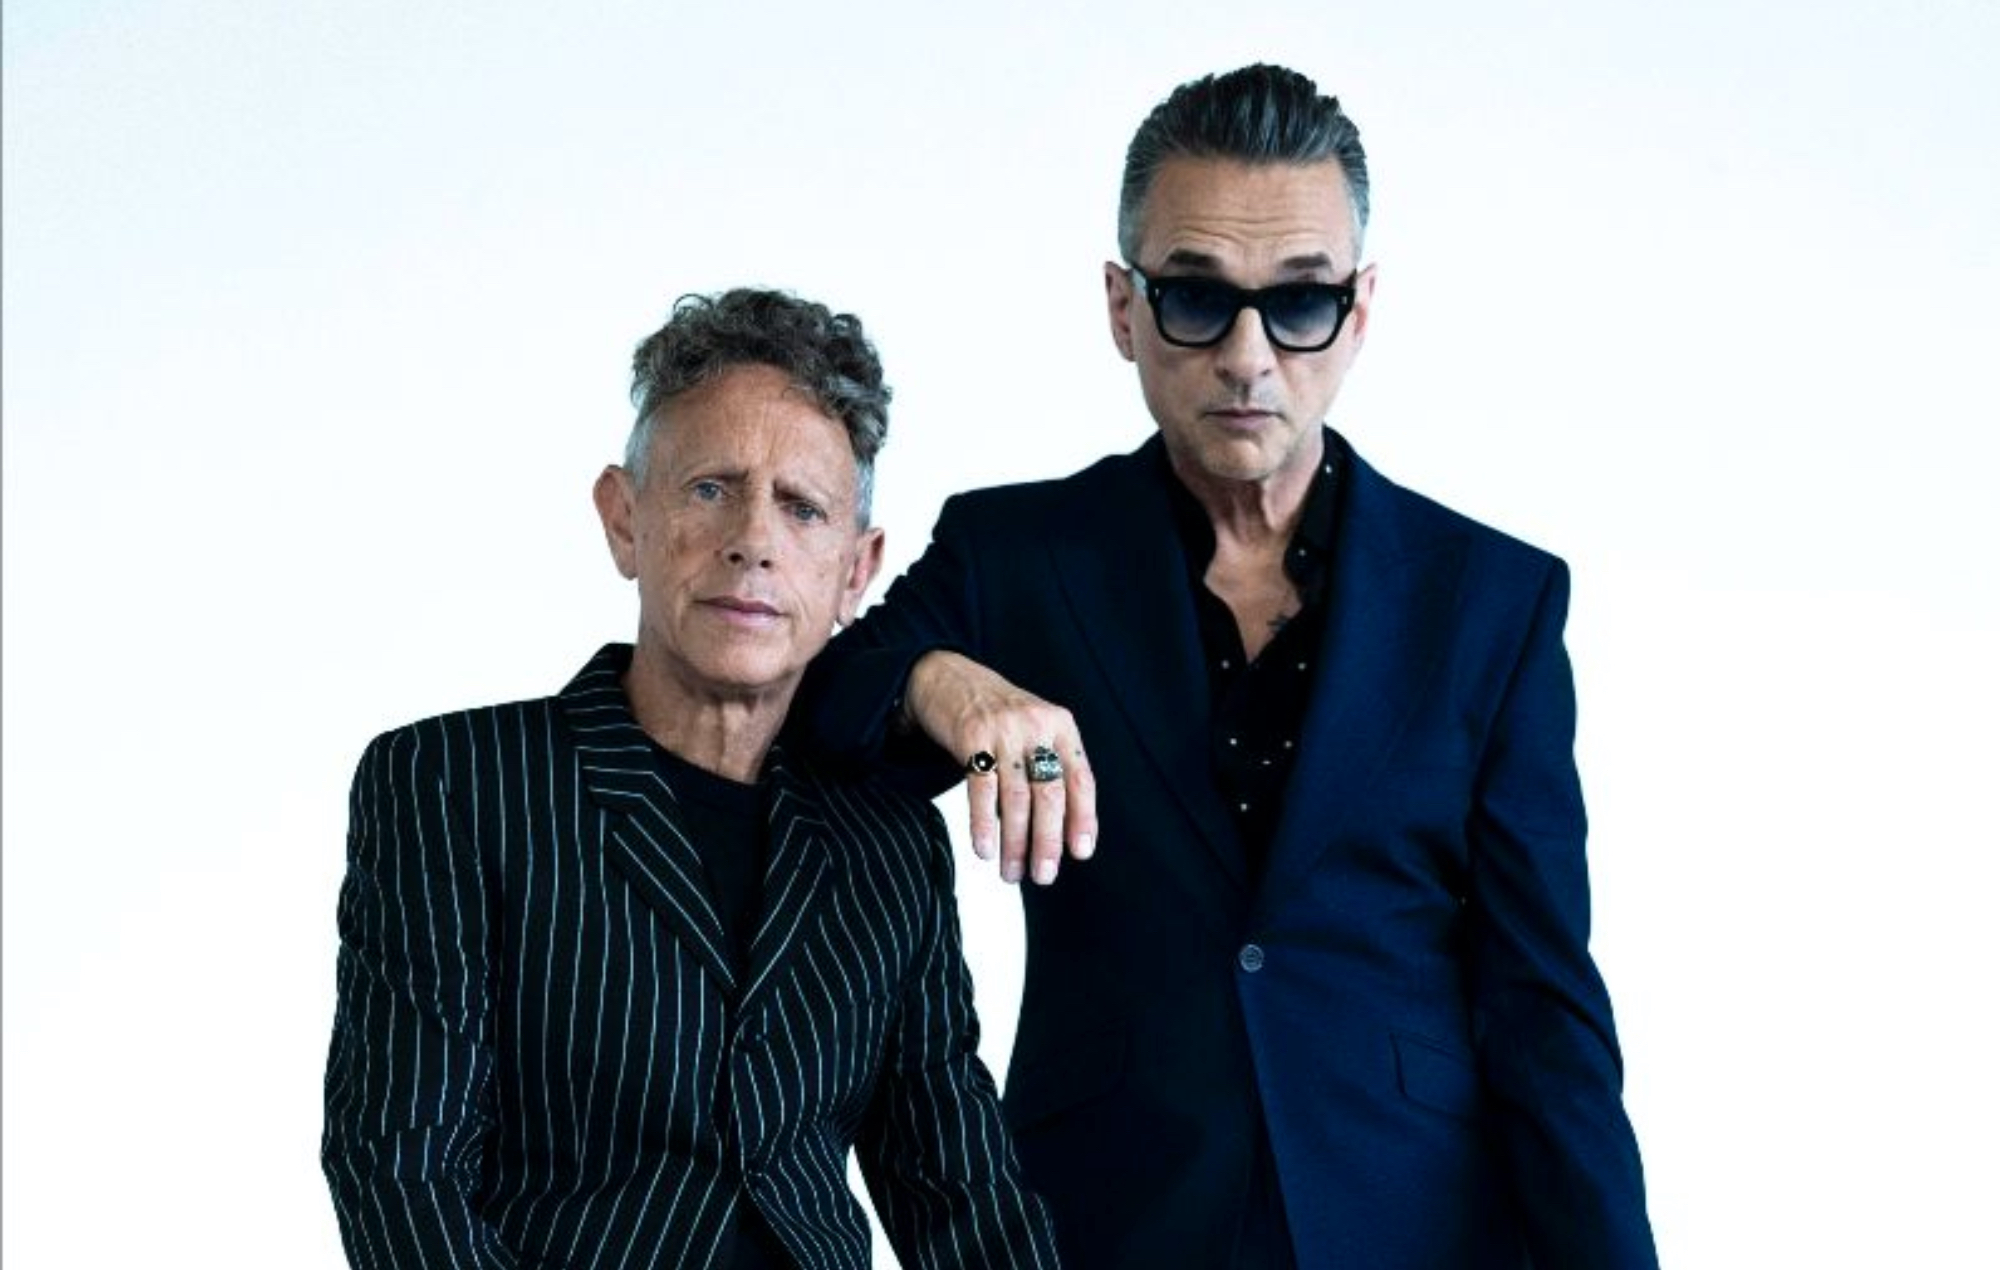 Depeche Mode announces the first part of its North American tour "Memento Mori"